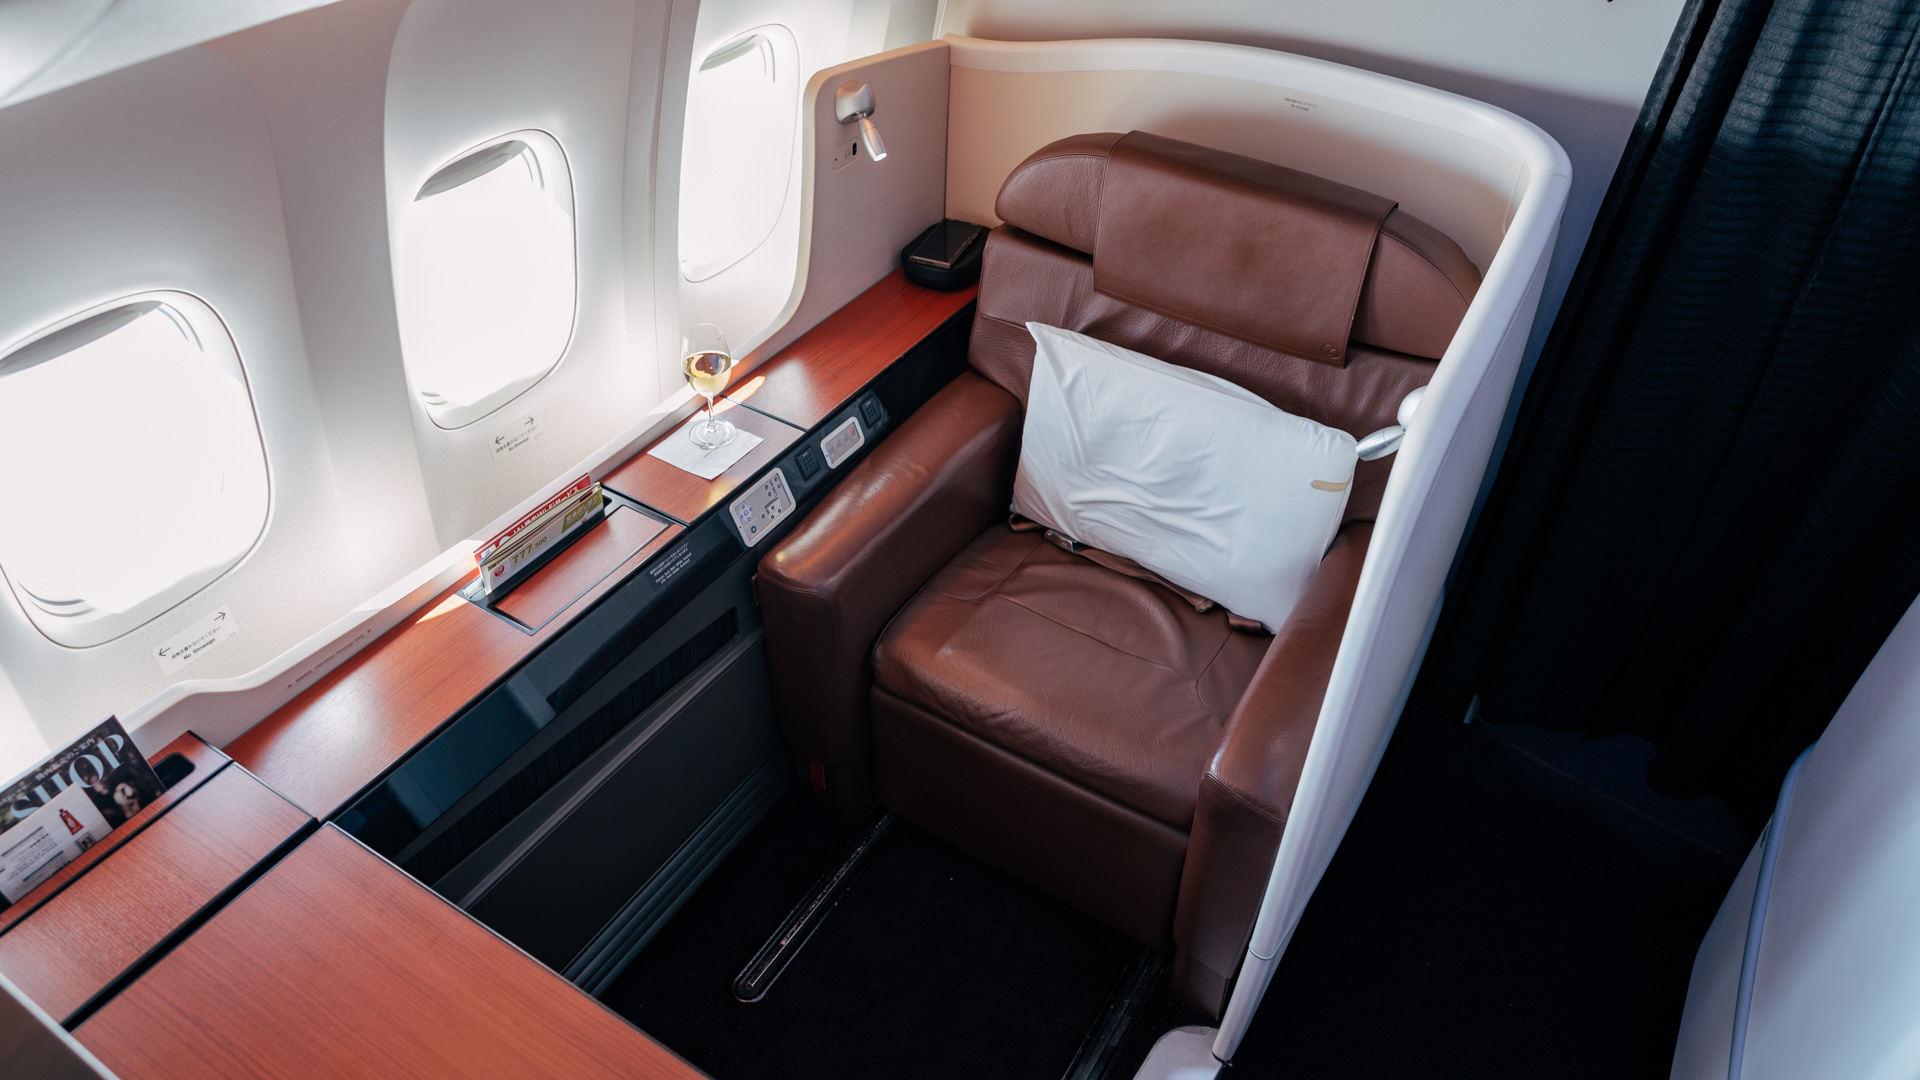 Japan Airlines Boeing 777 First Class seat